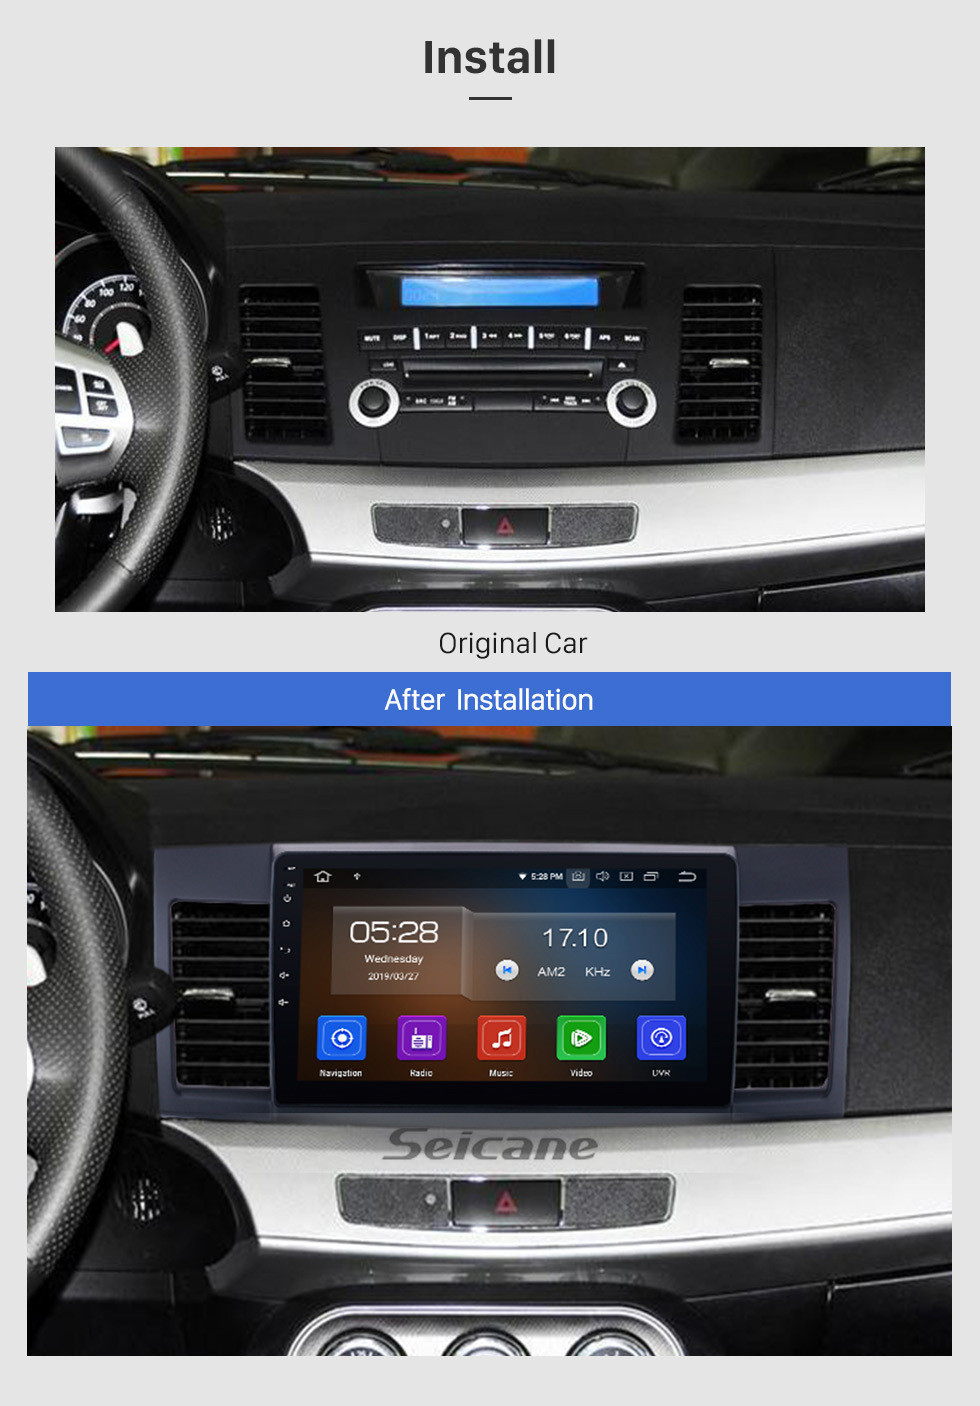 Seicane 2007-2015 Mitsubishi LANCER Android 11.0 Radio DVD player GPS navigation system Bluetooth HD 1024*600 touch screen Mirror link OBD2 DVR Rearview camera TV 1080P Video 3G WIFI Steering Wheel Control USB